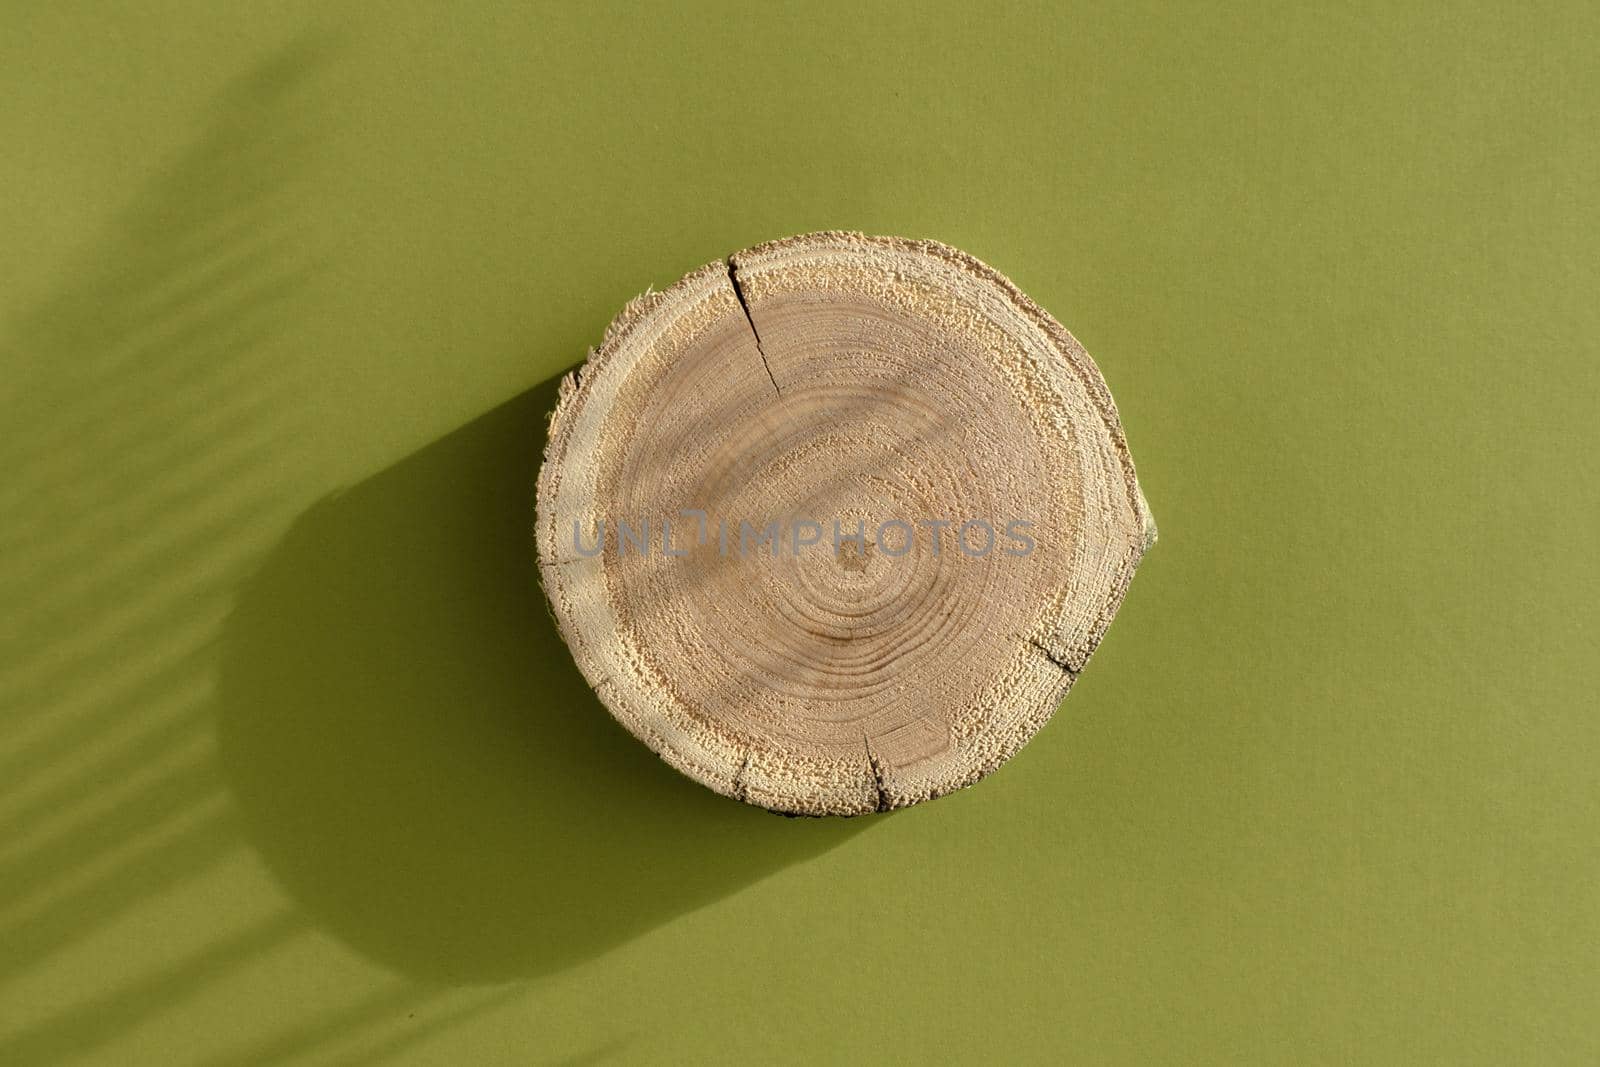 Woodcut lying on a trendy green background with shadows of fern. A wooden platform with shades for natural cosmetics or products presentation. Wooden tray mockup in the sunlight. Top view